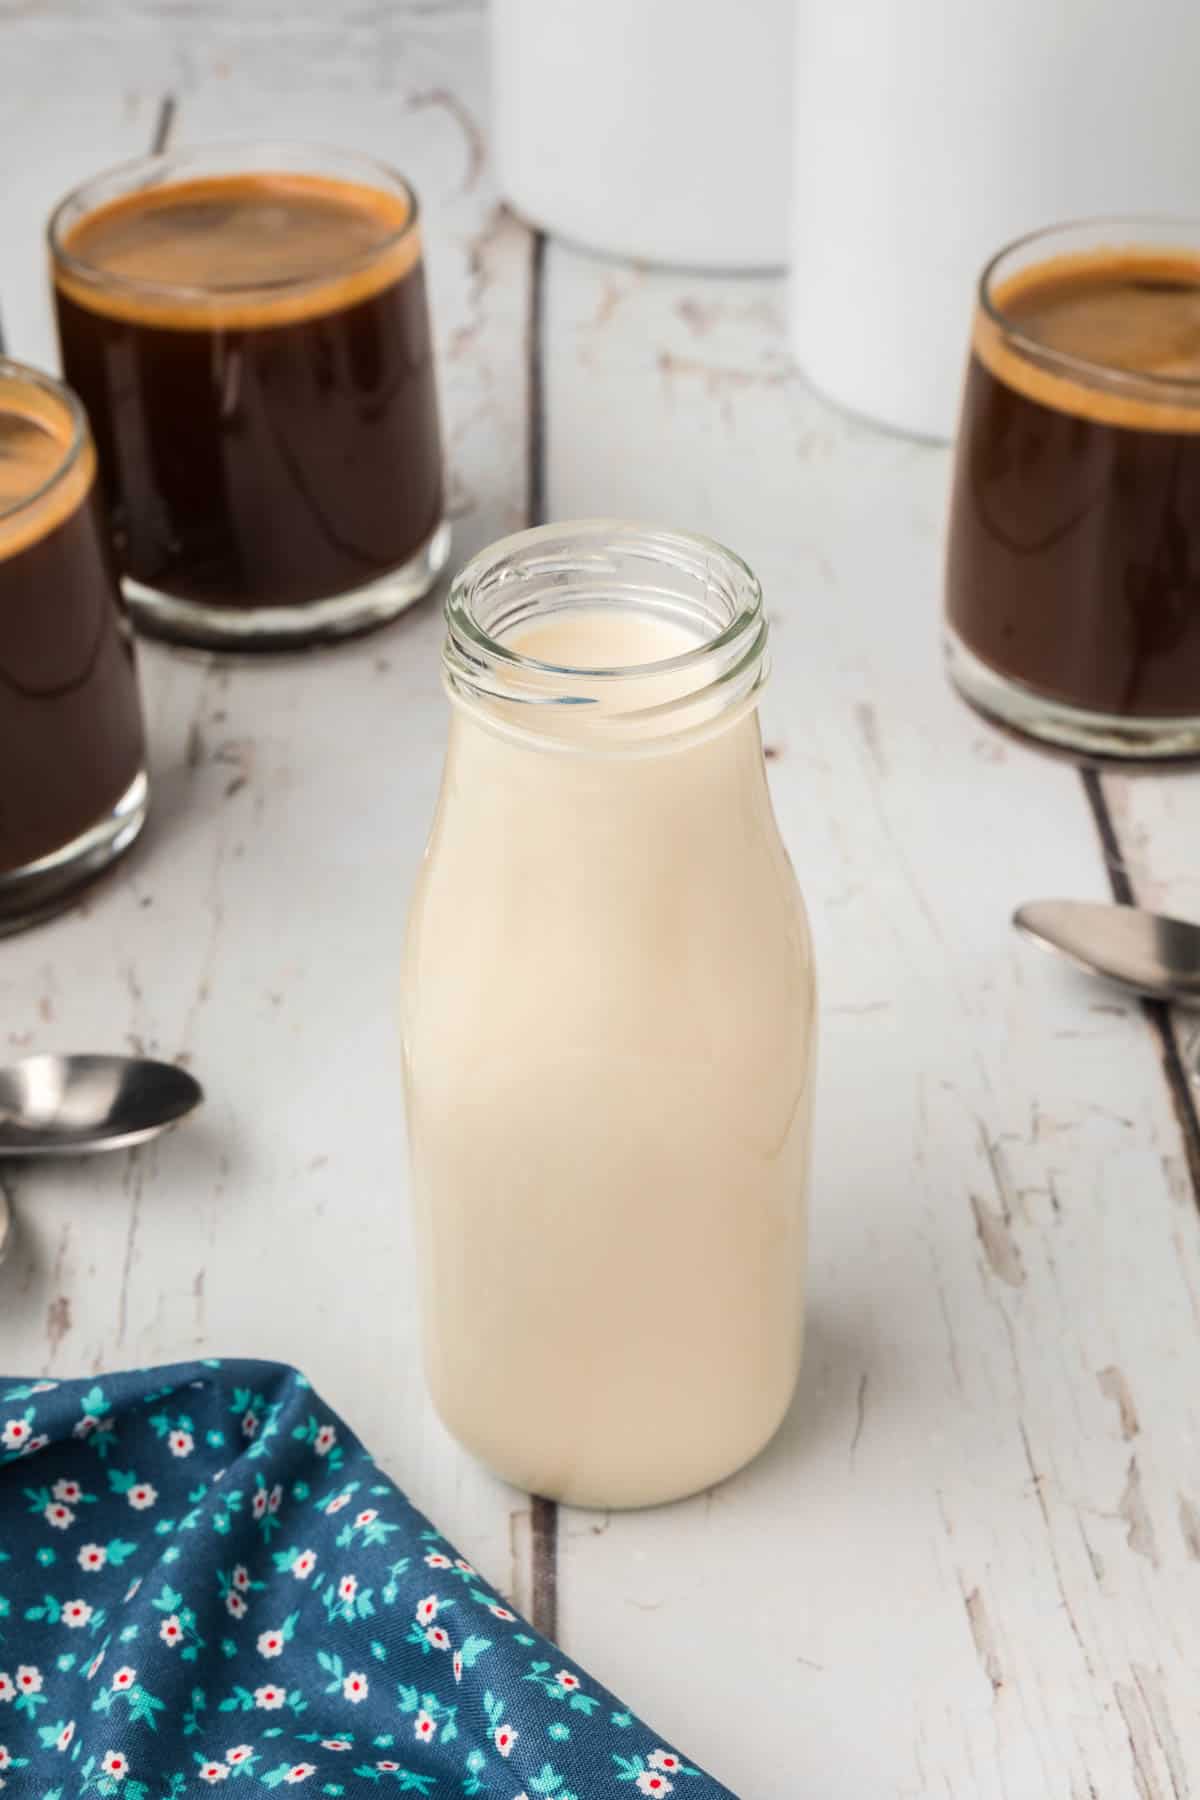 A glass bottle of milk is placed on a wooden table. Surrounding it are three small glasses filled with dark coffee and homemade coffee creamer. Two spoons lie on the table, and a blue floral cloth is partially visible in the bottom left corner.